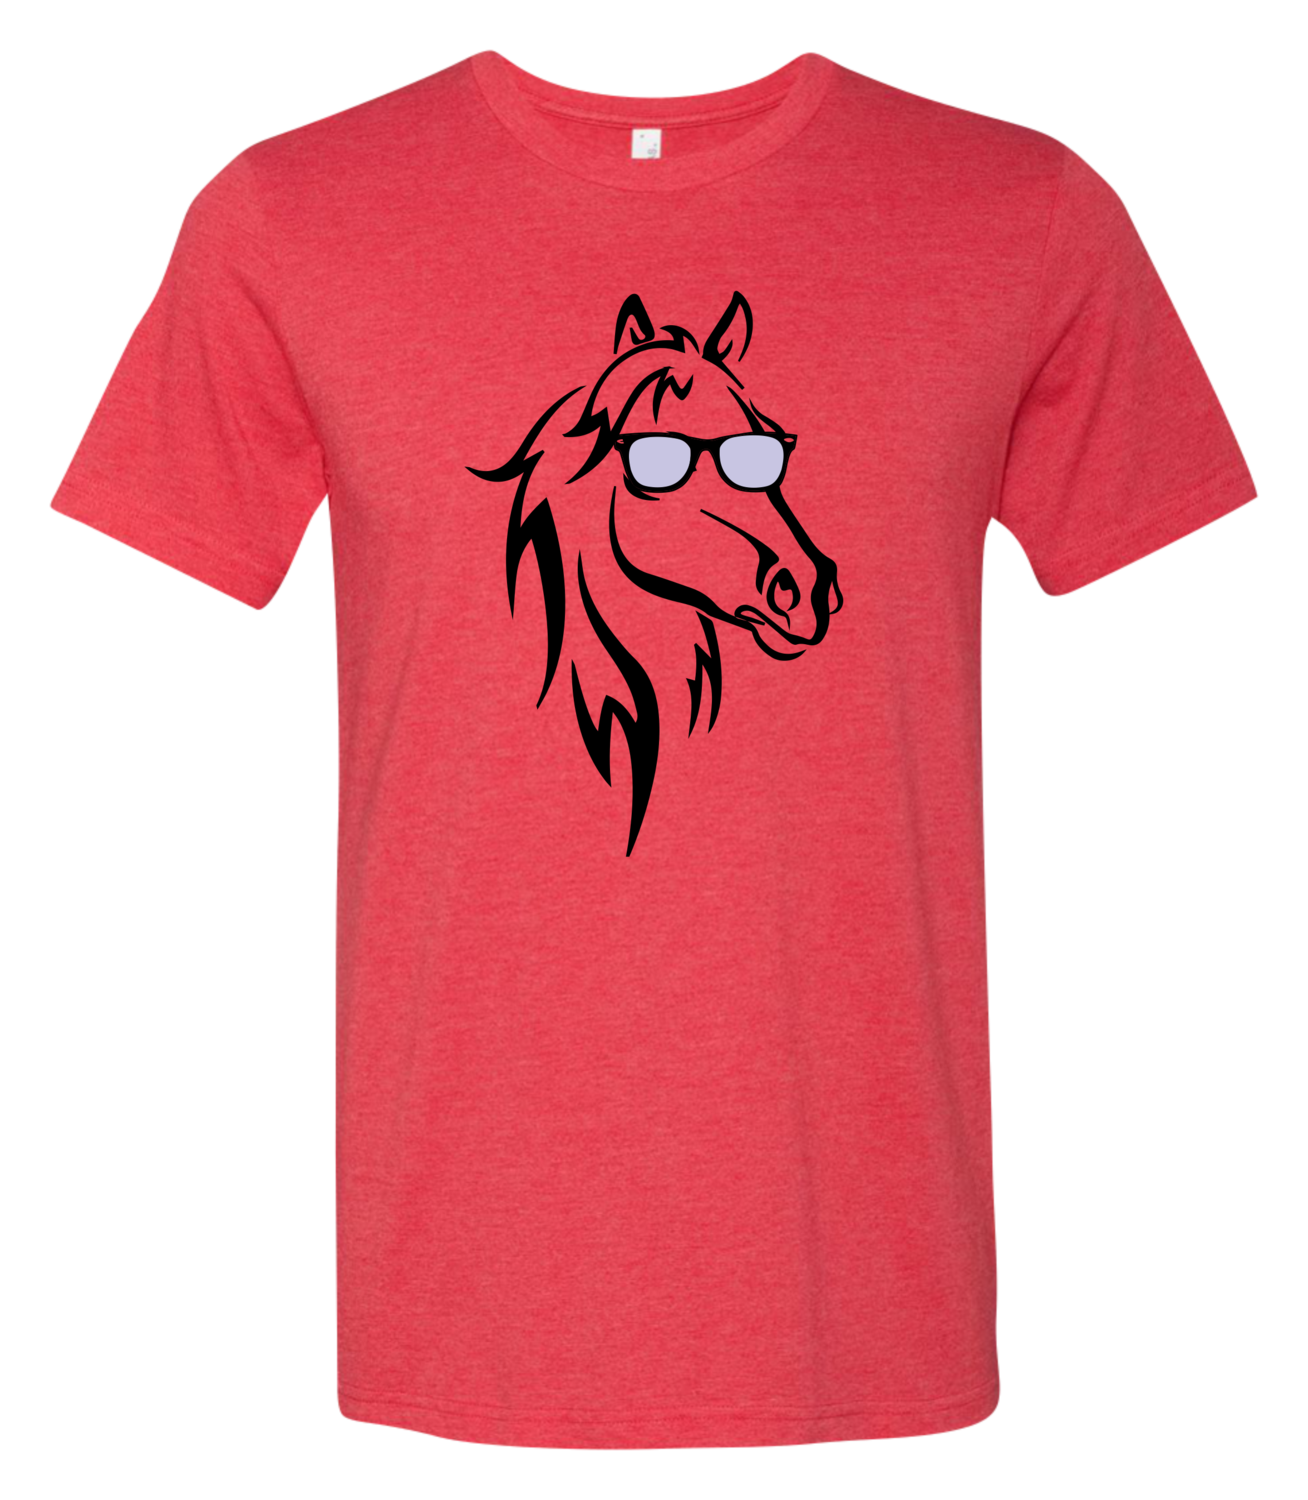 Horse with Glasses Short-Sleeve Graphic T-shirt